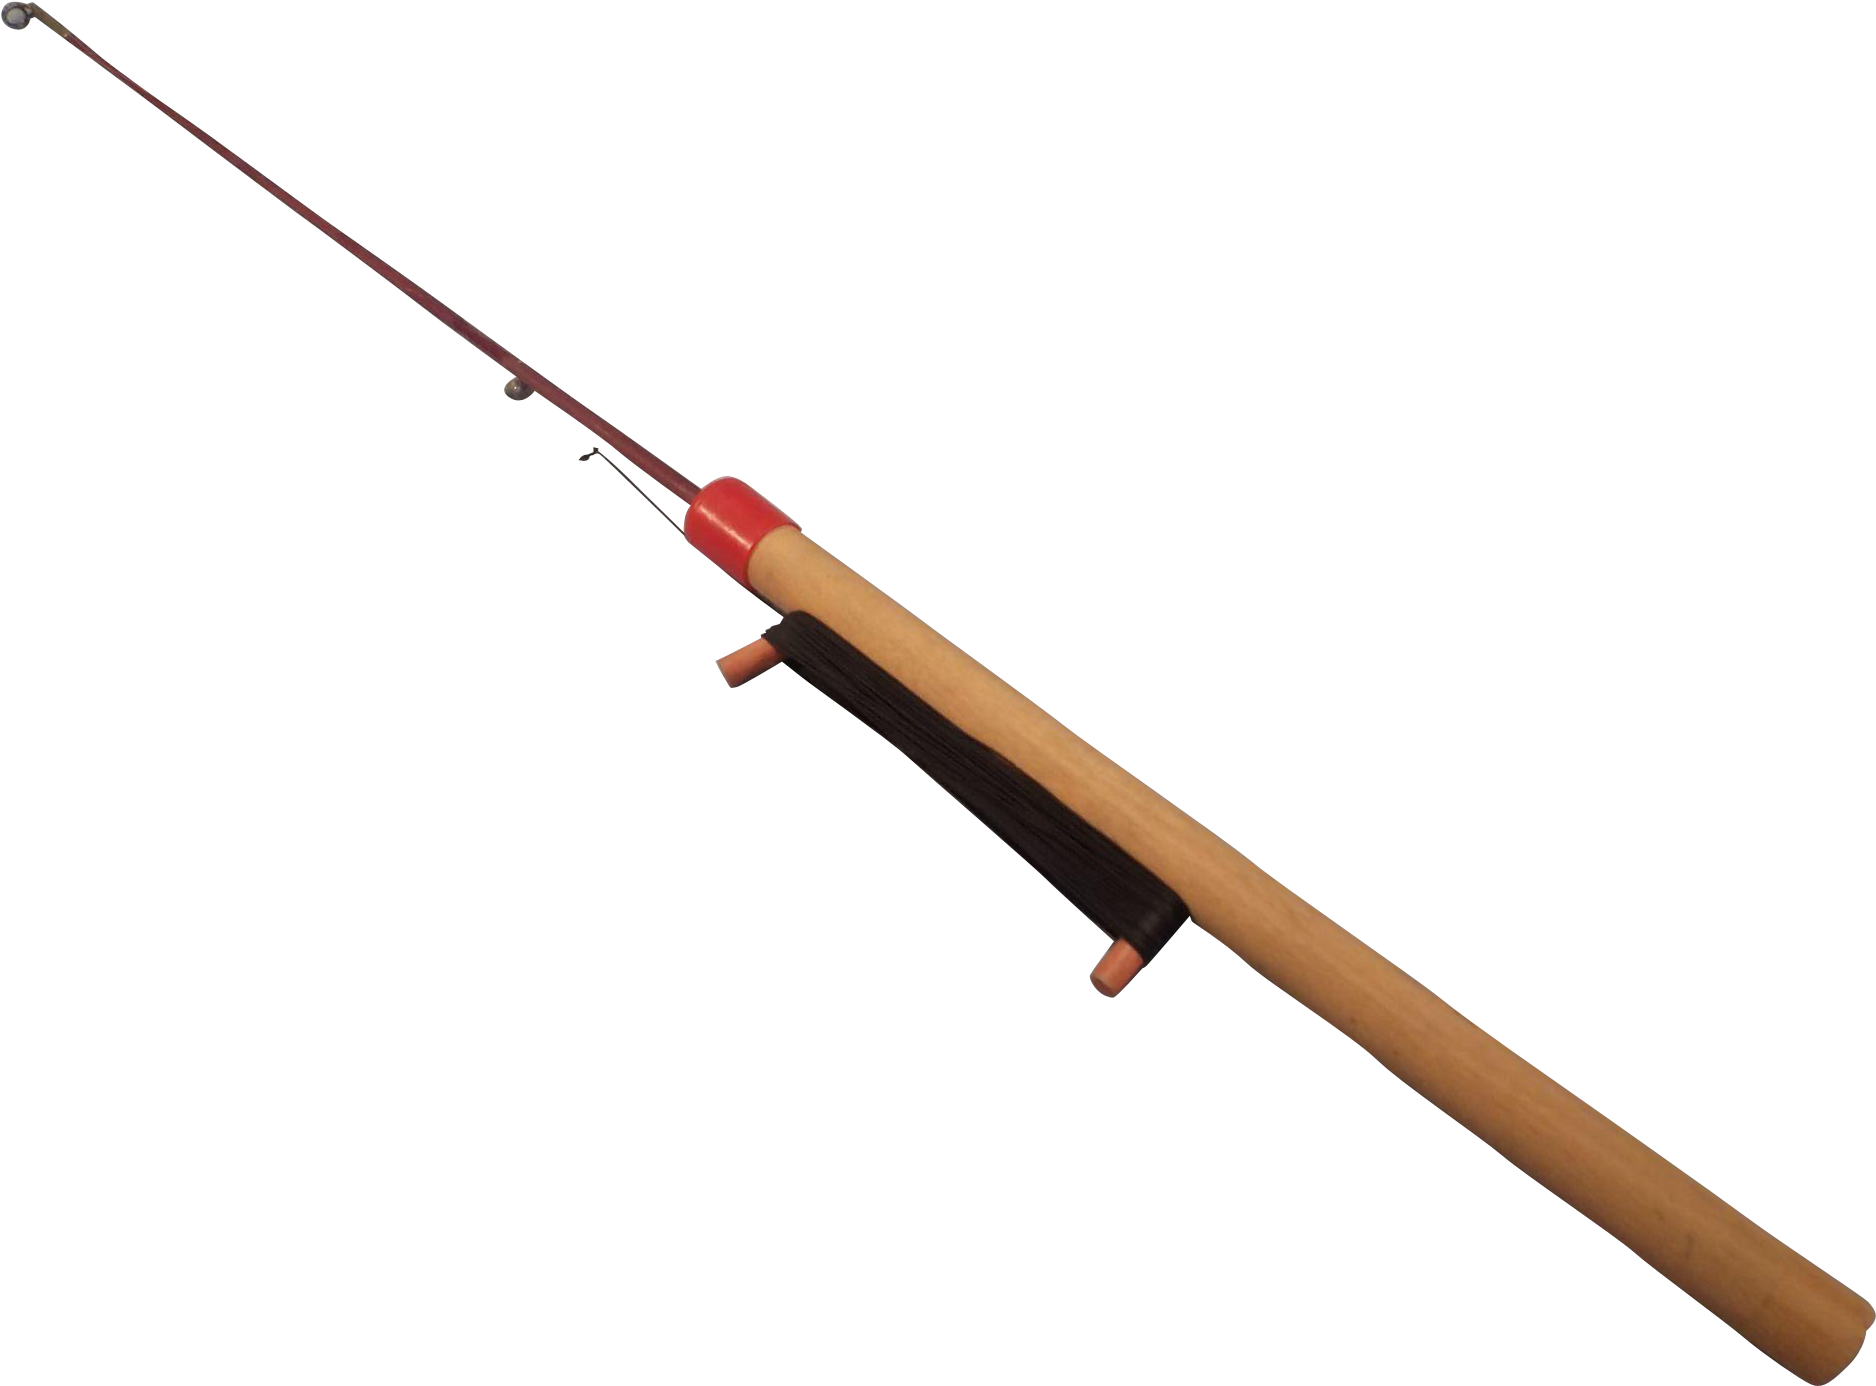 Download Wooden Pole Fishing Free HD Image HQ PNG Image